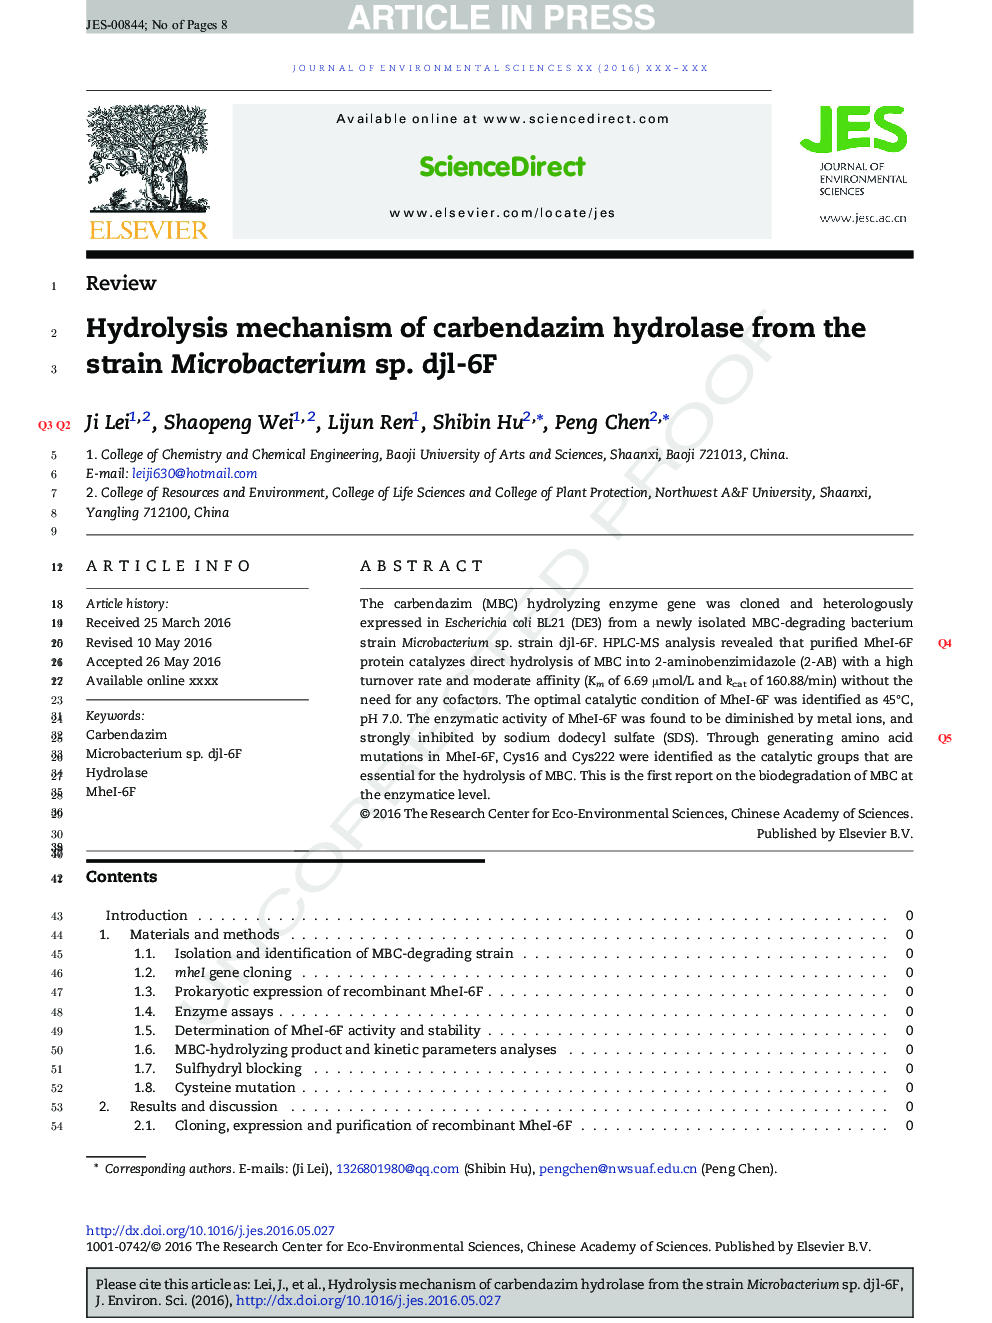 Hydrolysis mechanism of carbendazim hydrolase from the strain Microbacterium sp. djl-6F